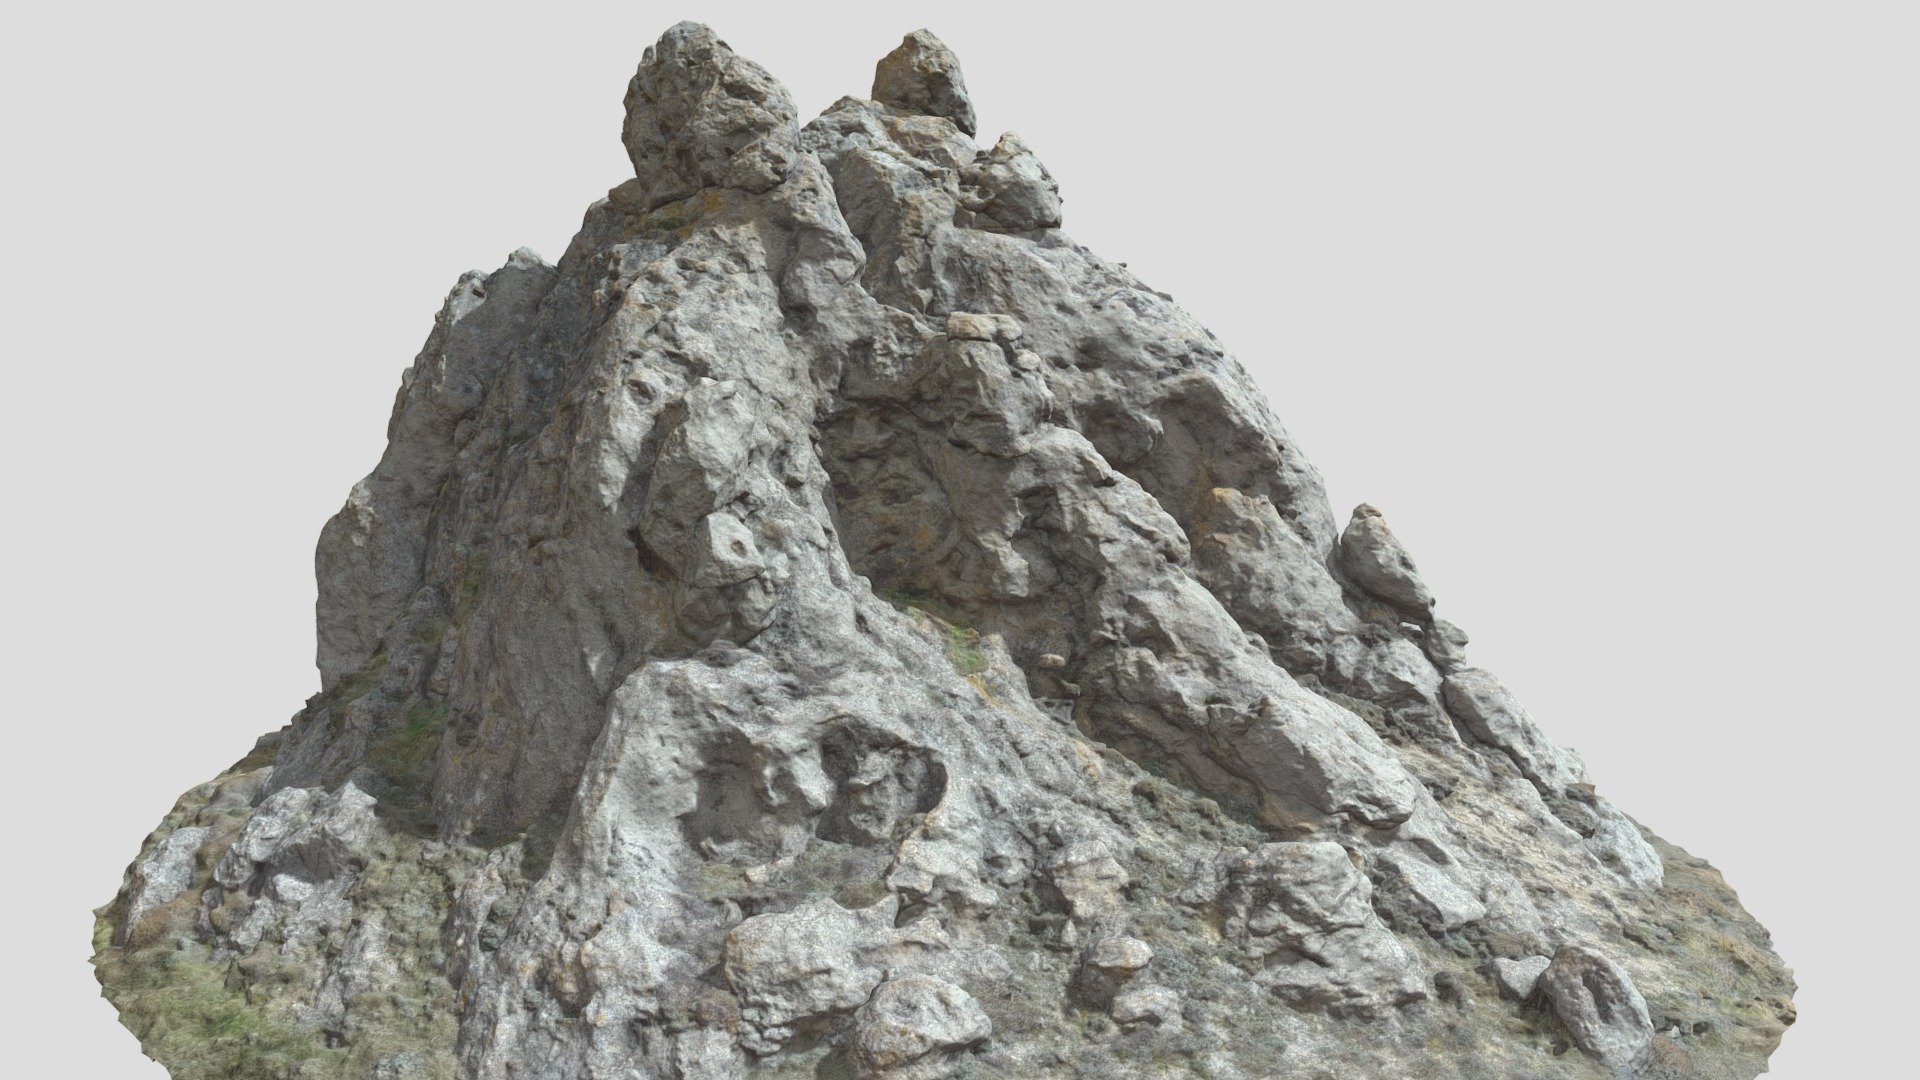 Fully processed 3D scans: no light information, color-matched, etc. 

Ready to use for all kind of CGI

Source Contains:





.blend




.obj




.fbx



8K Textures for each model:





normal




albedo




roughness



Please let me know if something isn’t working as it should.

Big Mountain Peak Cliff Rock Boulder Drone Scan - Big Mountain Peak Cliff Rock Boulder Drone Scan - Buy Royalty Free 3D model by Per's Scan Collection (@perz_scans) 3d model